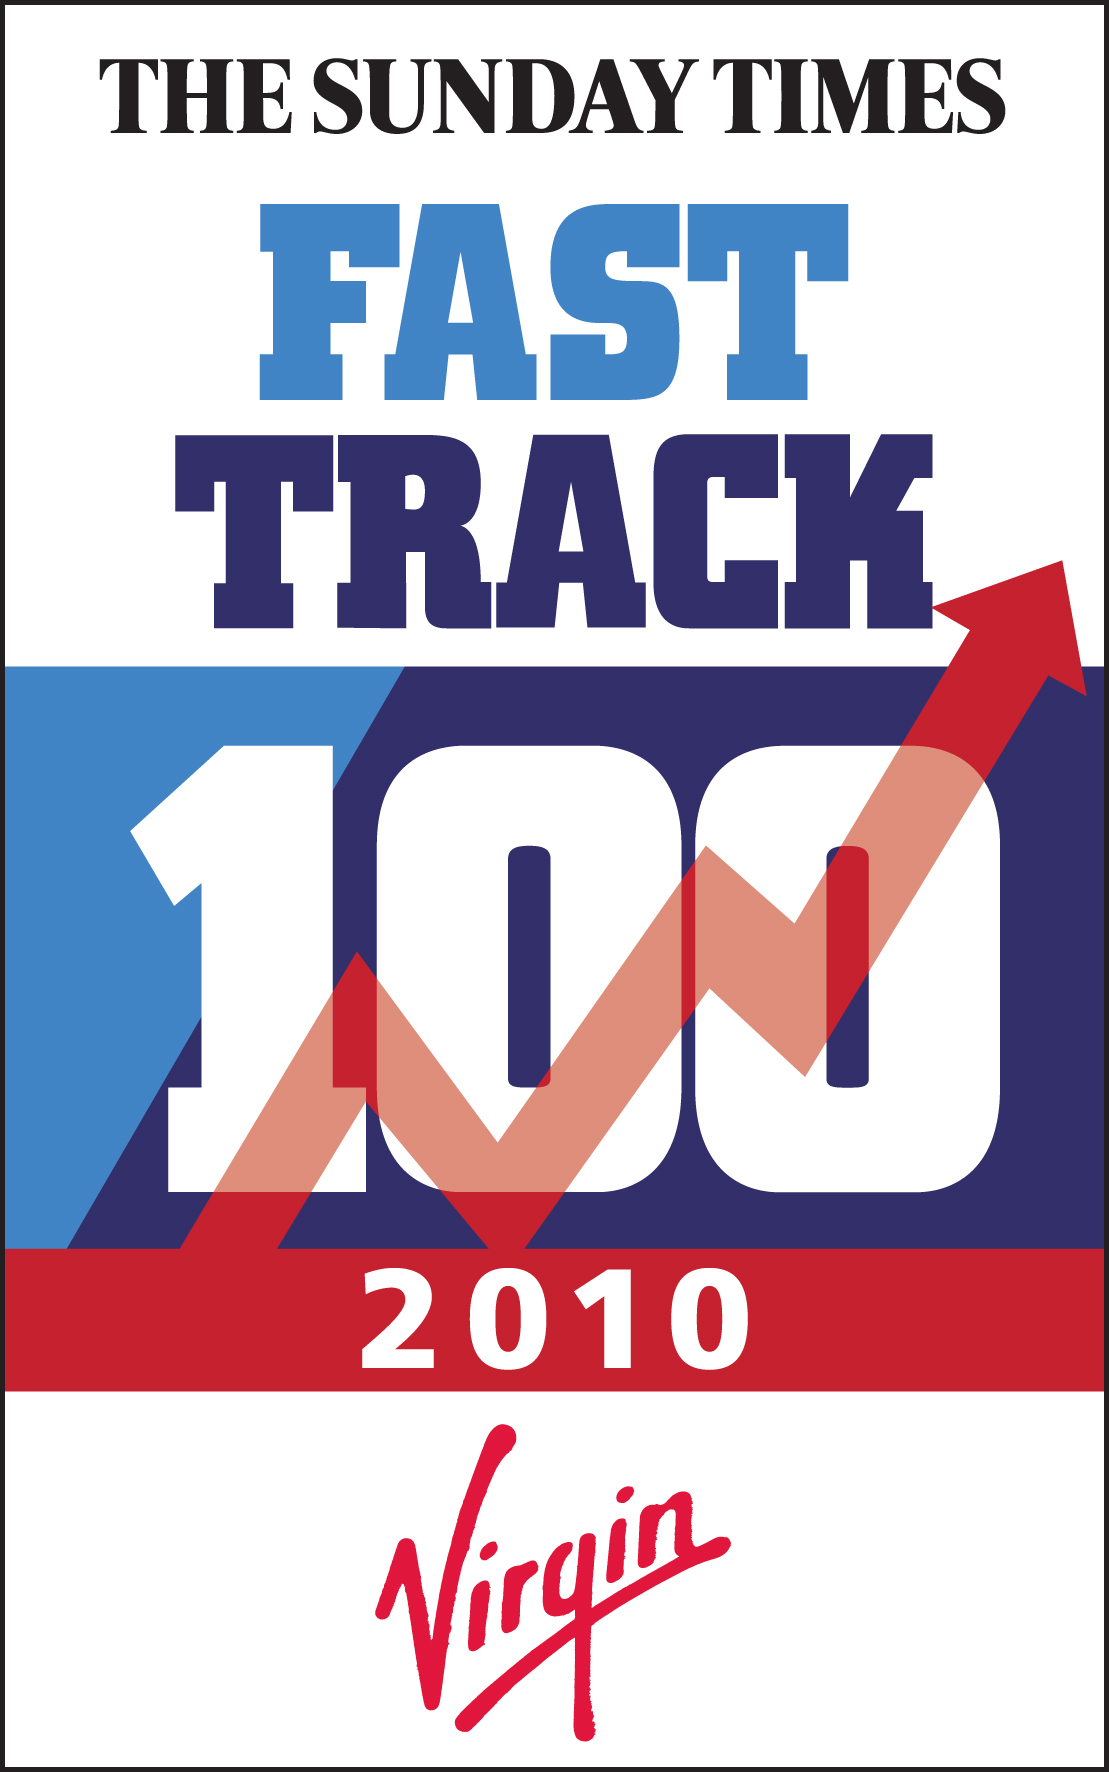 Sunday Times Virgin Fasttrack 100 Company